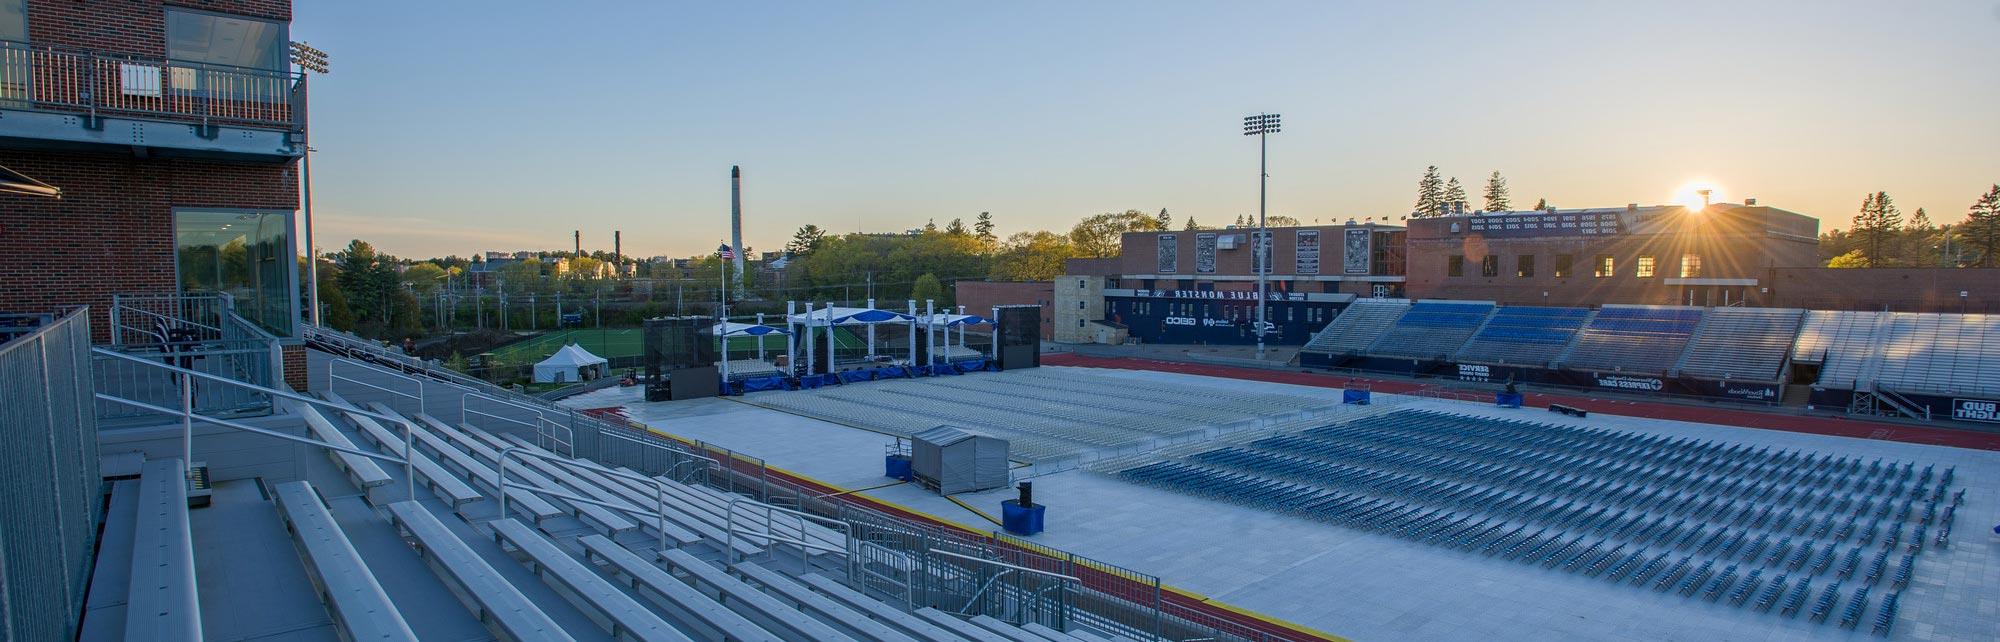 The empty football stadium, prepared for commencement